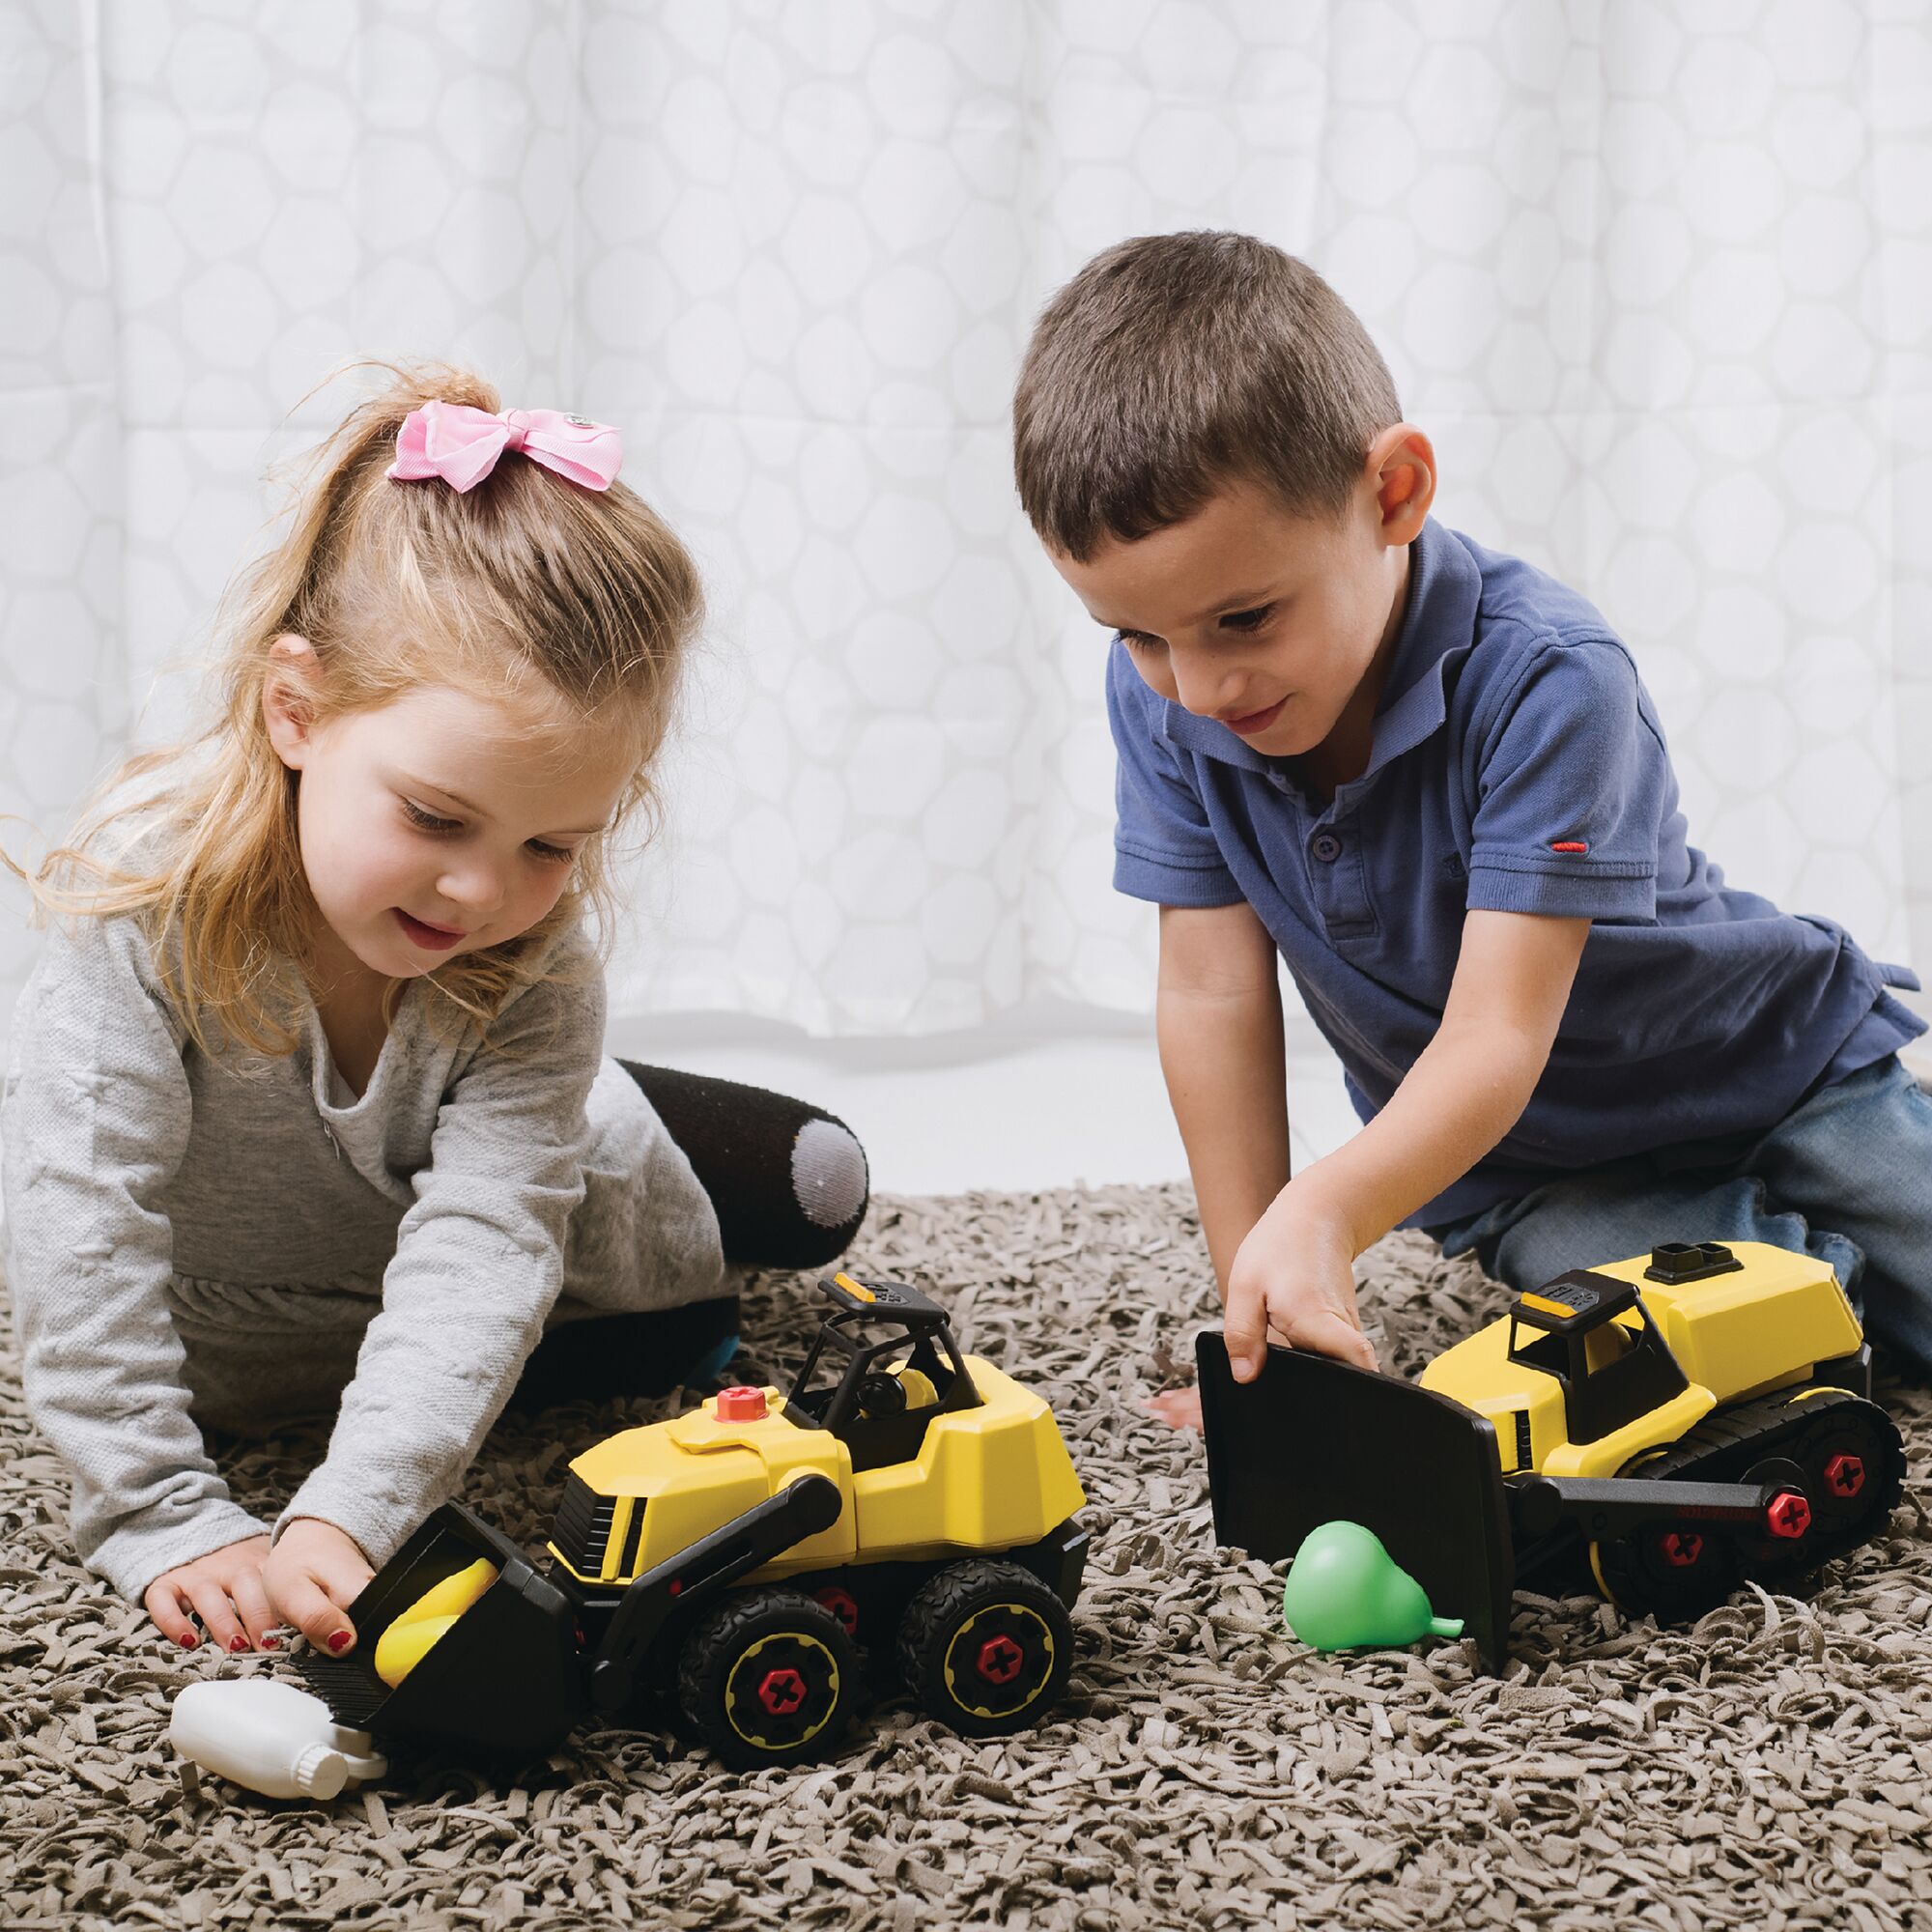 Take-Apart Truck Toy DIY Construction Bulldozer Assembly Light and Sound Car Truck with Drill and Tools LED Light Up for 3 4 5 Years Old Boys Girls Toddler Learning Stuffers STEM Educational Gift 